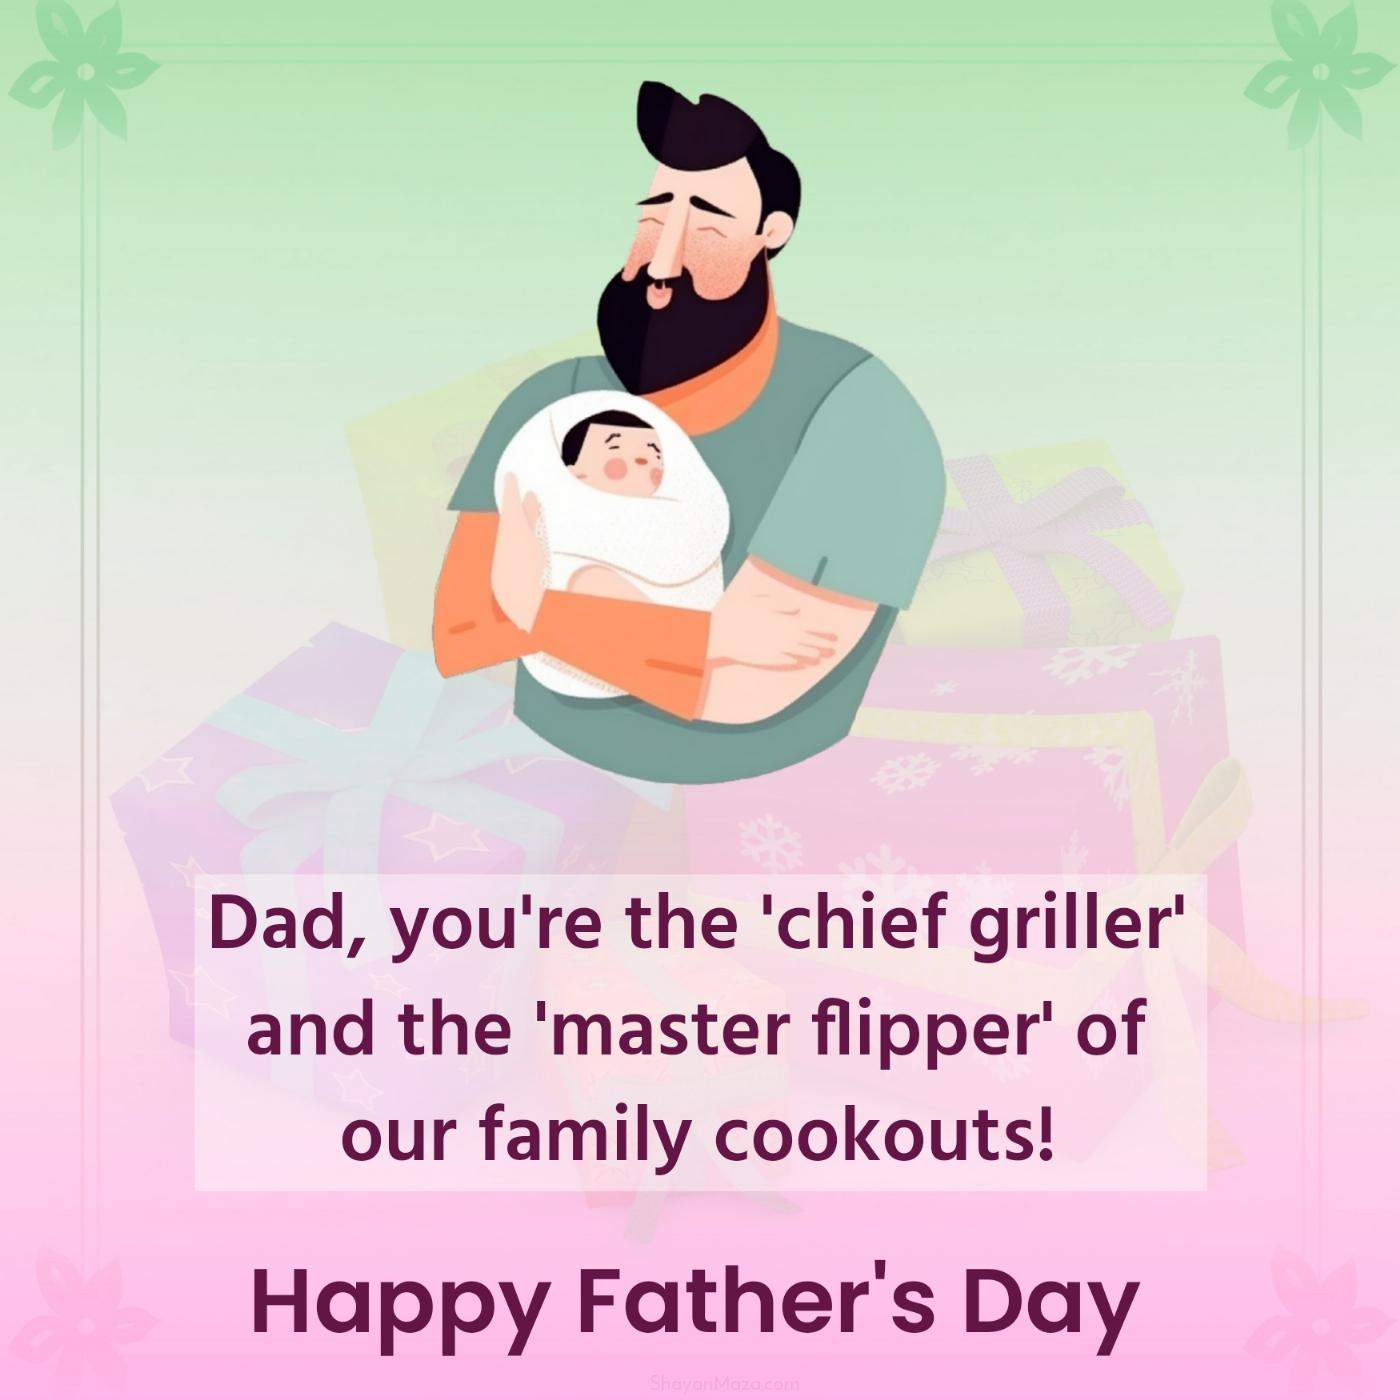 Dad you're the 'chief griller' and the 'master flipper'